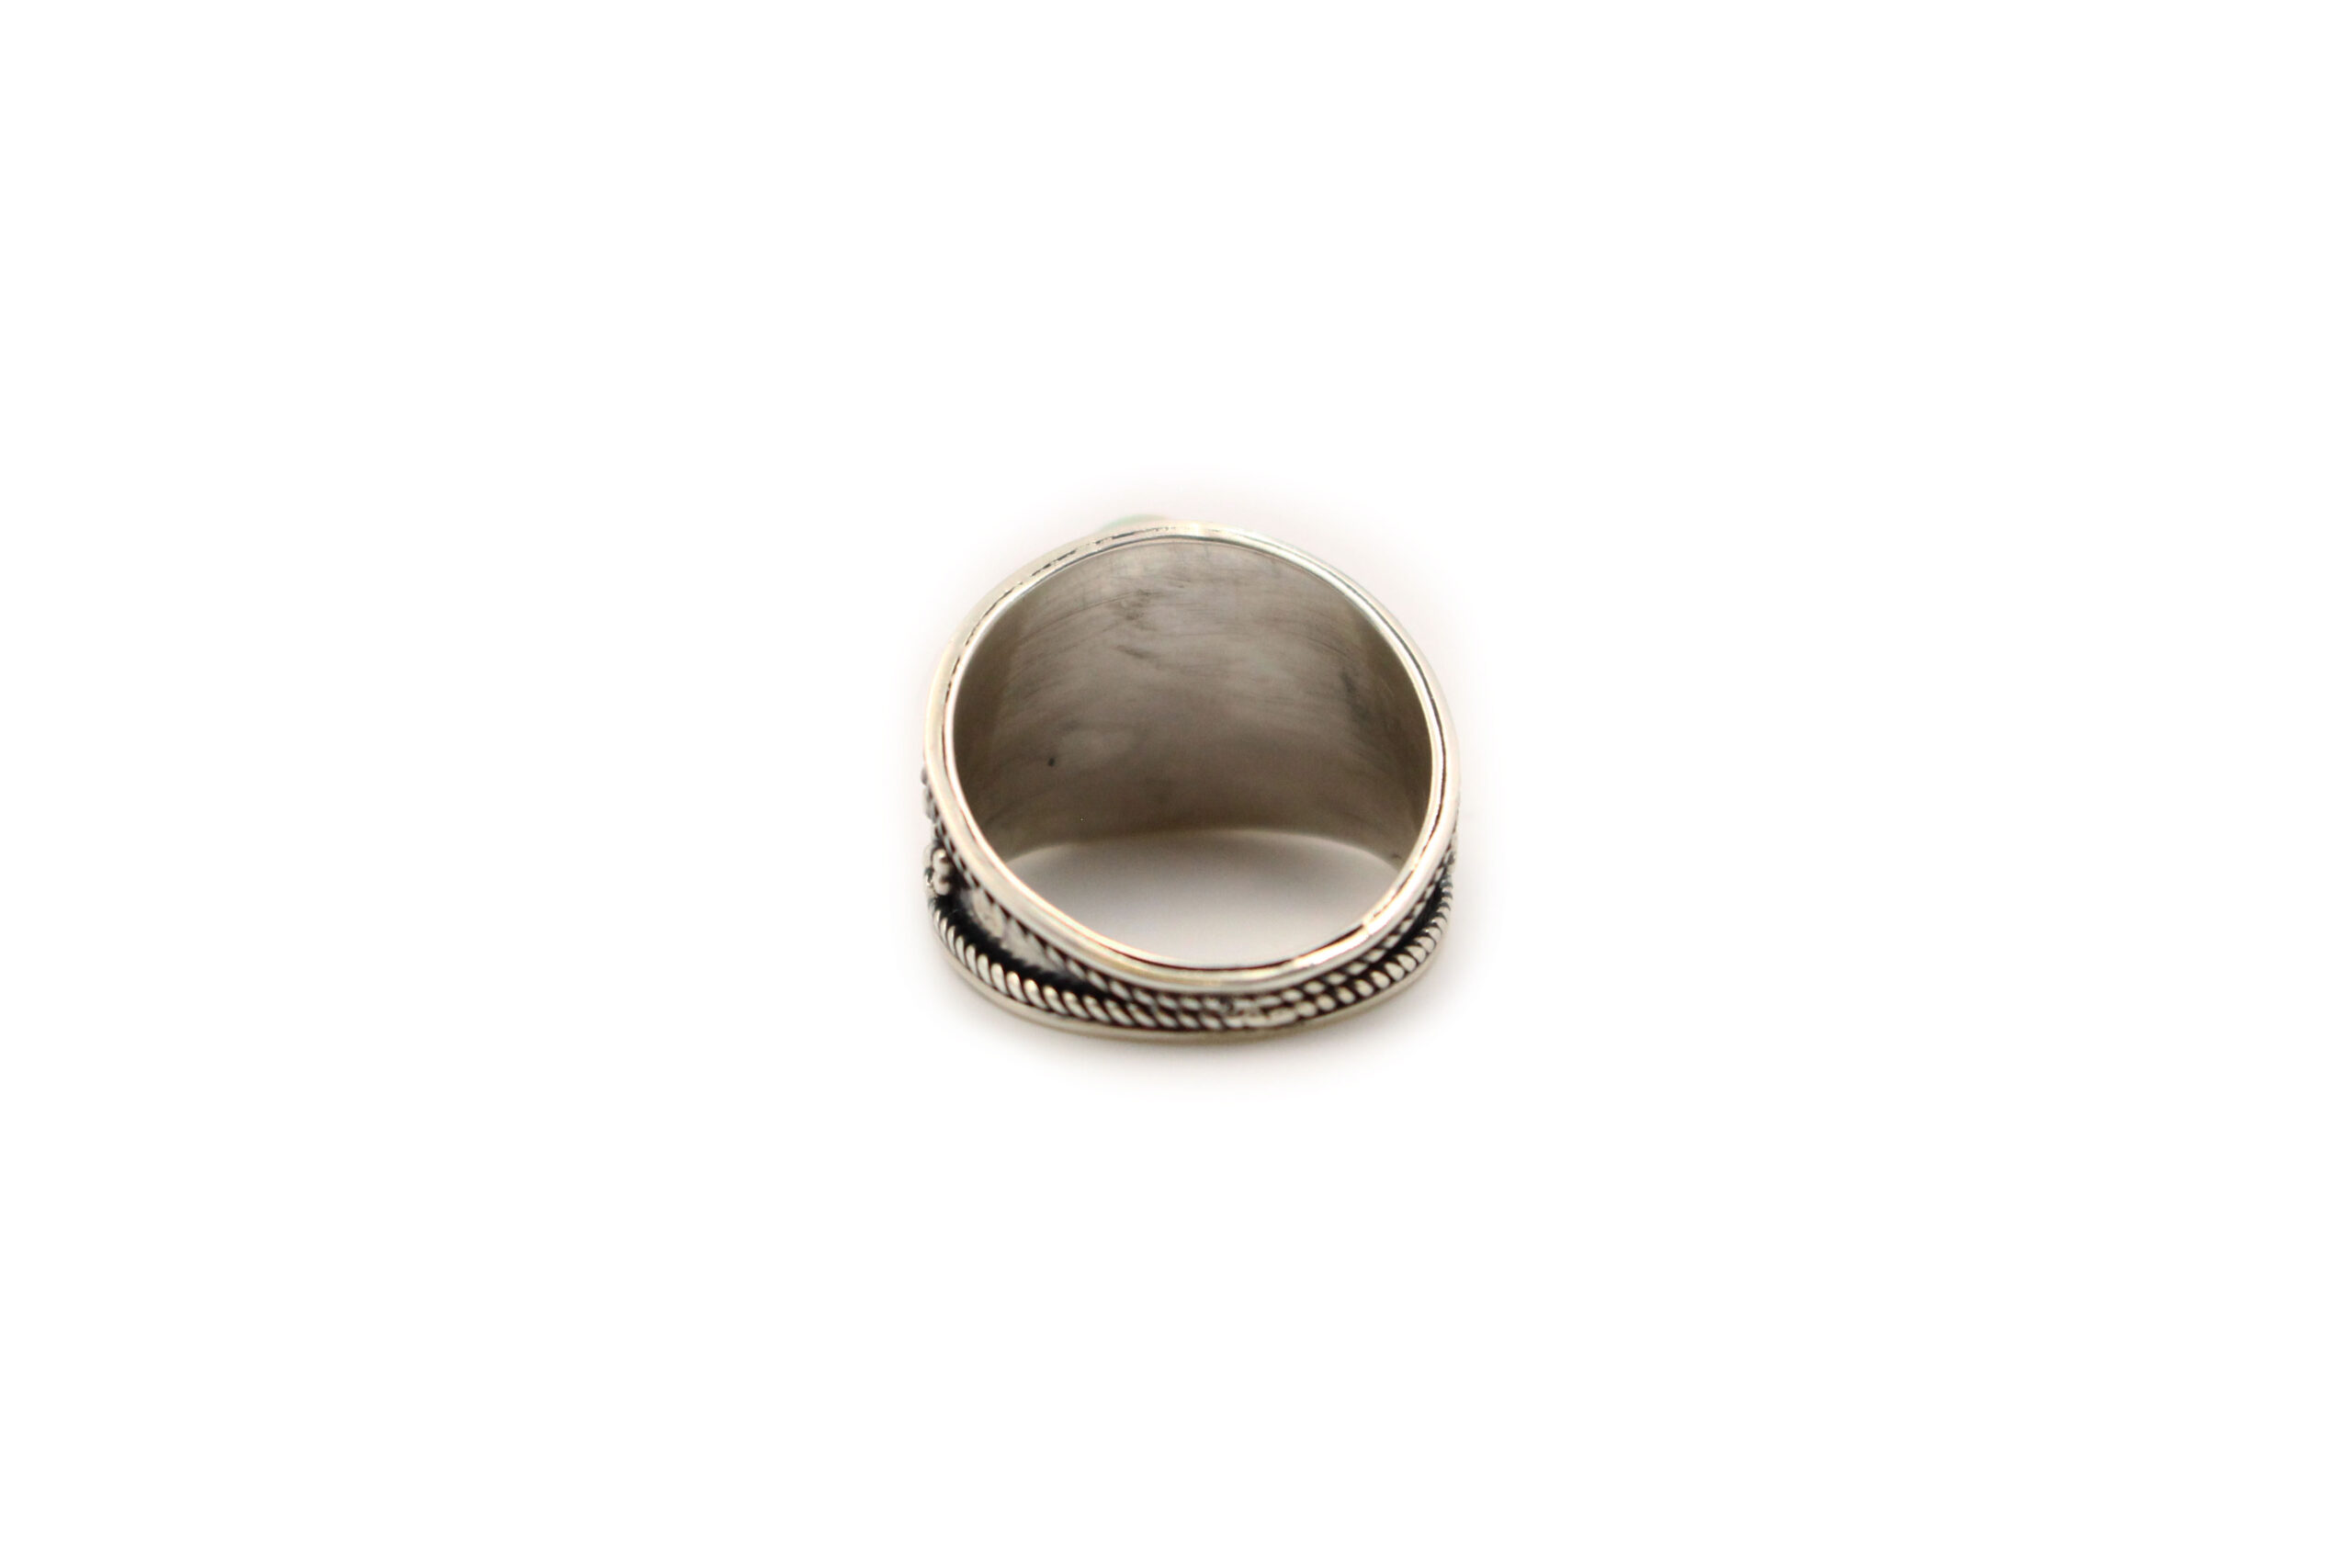 Opal "Cabochon" Sterling Silver Ring-Crystal Dreams